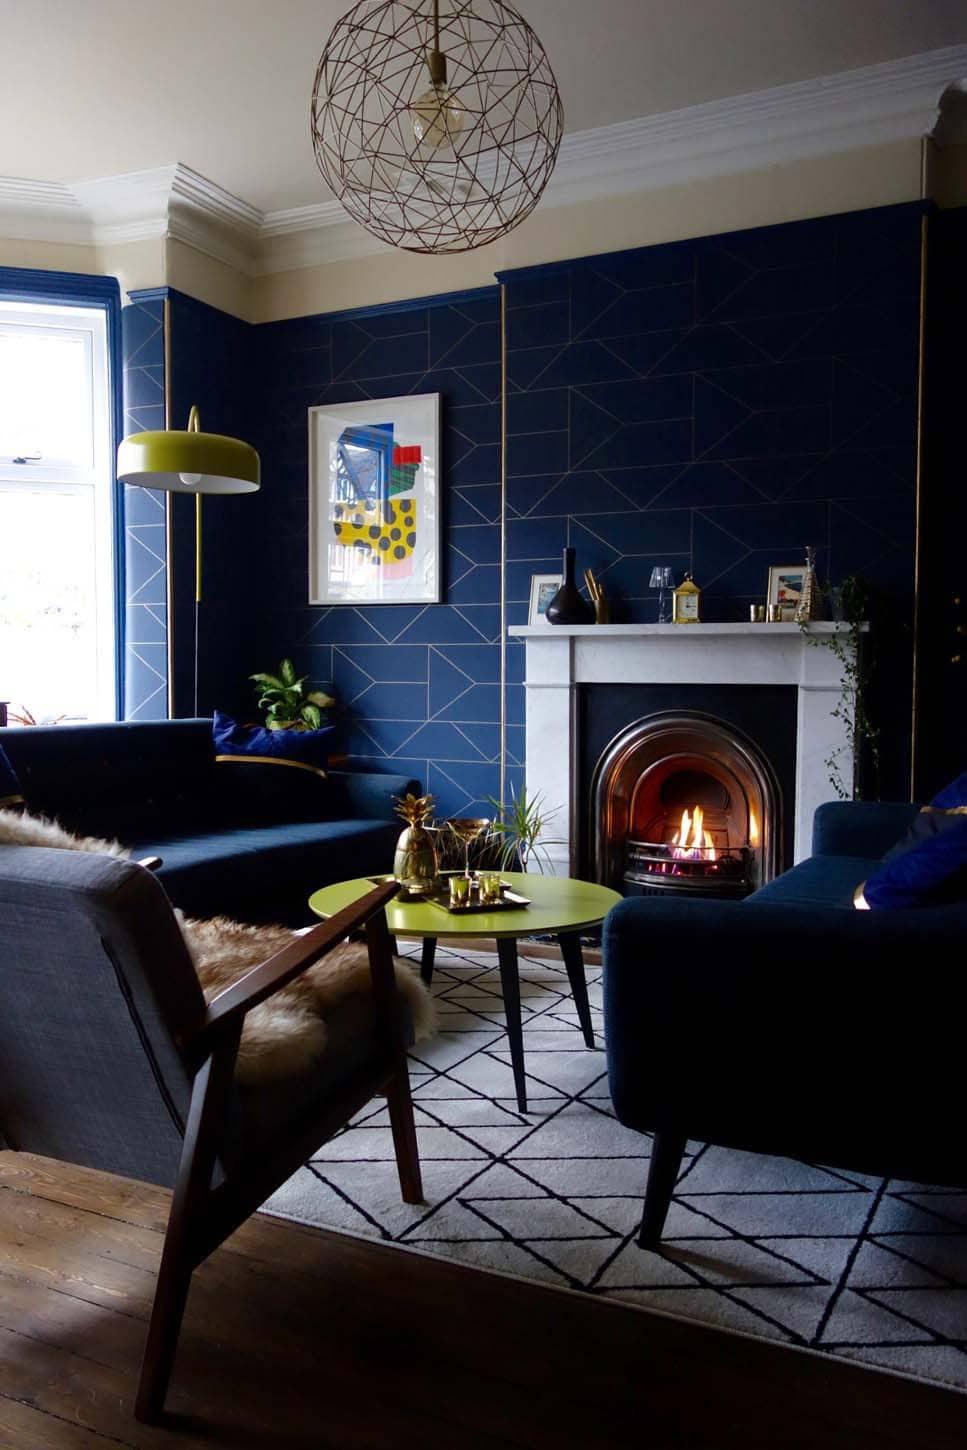 Moody Blue and Gold Interiors | Interior Design Trends ...